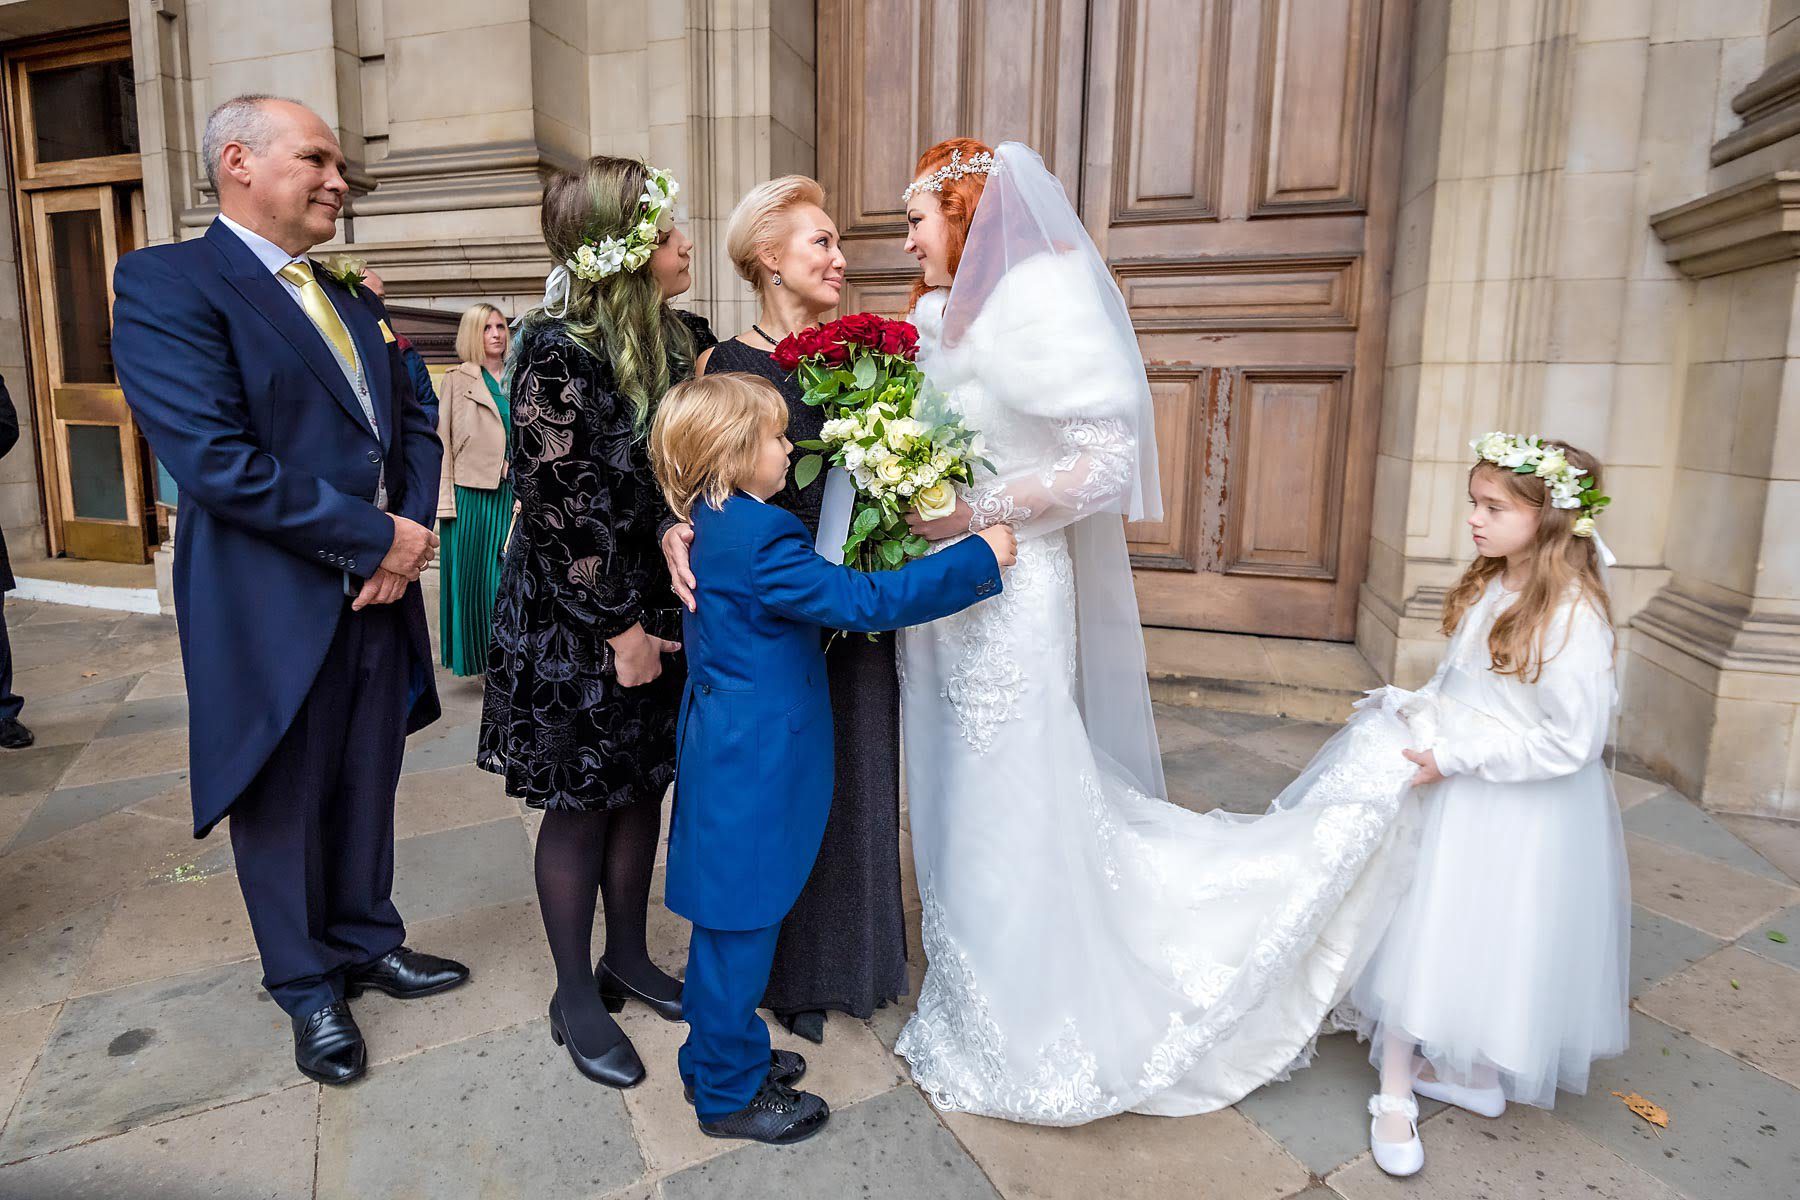 The bride chats with wedding guests outside her Brompton Oratory wedding in Knightsbridge